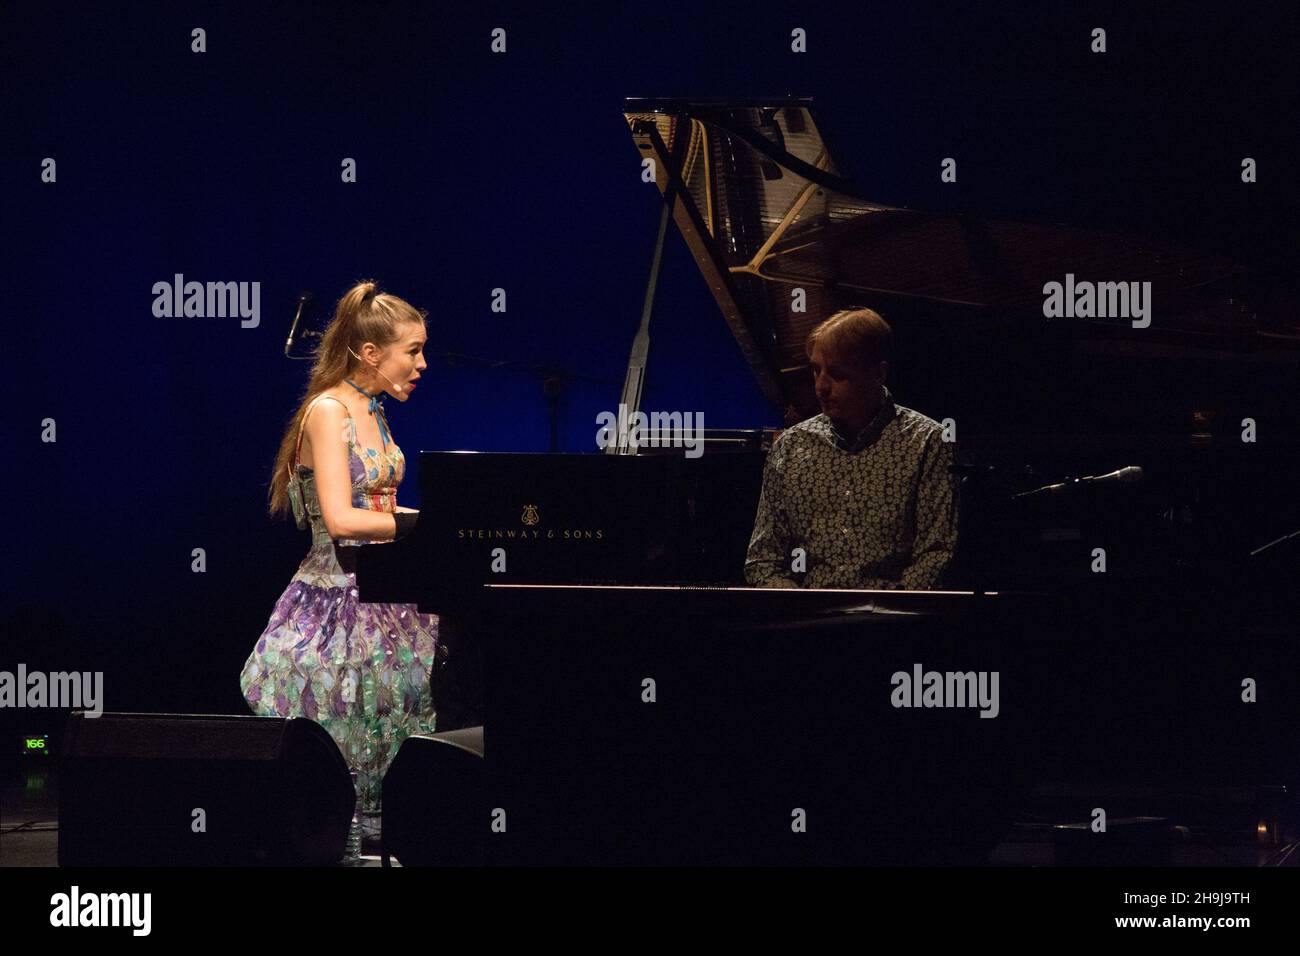 Joanna Newsom with her brother Pete Newsom on stage during the last date of her European tour at the Hammersmith Eventim in London Stock Photo